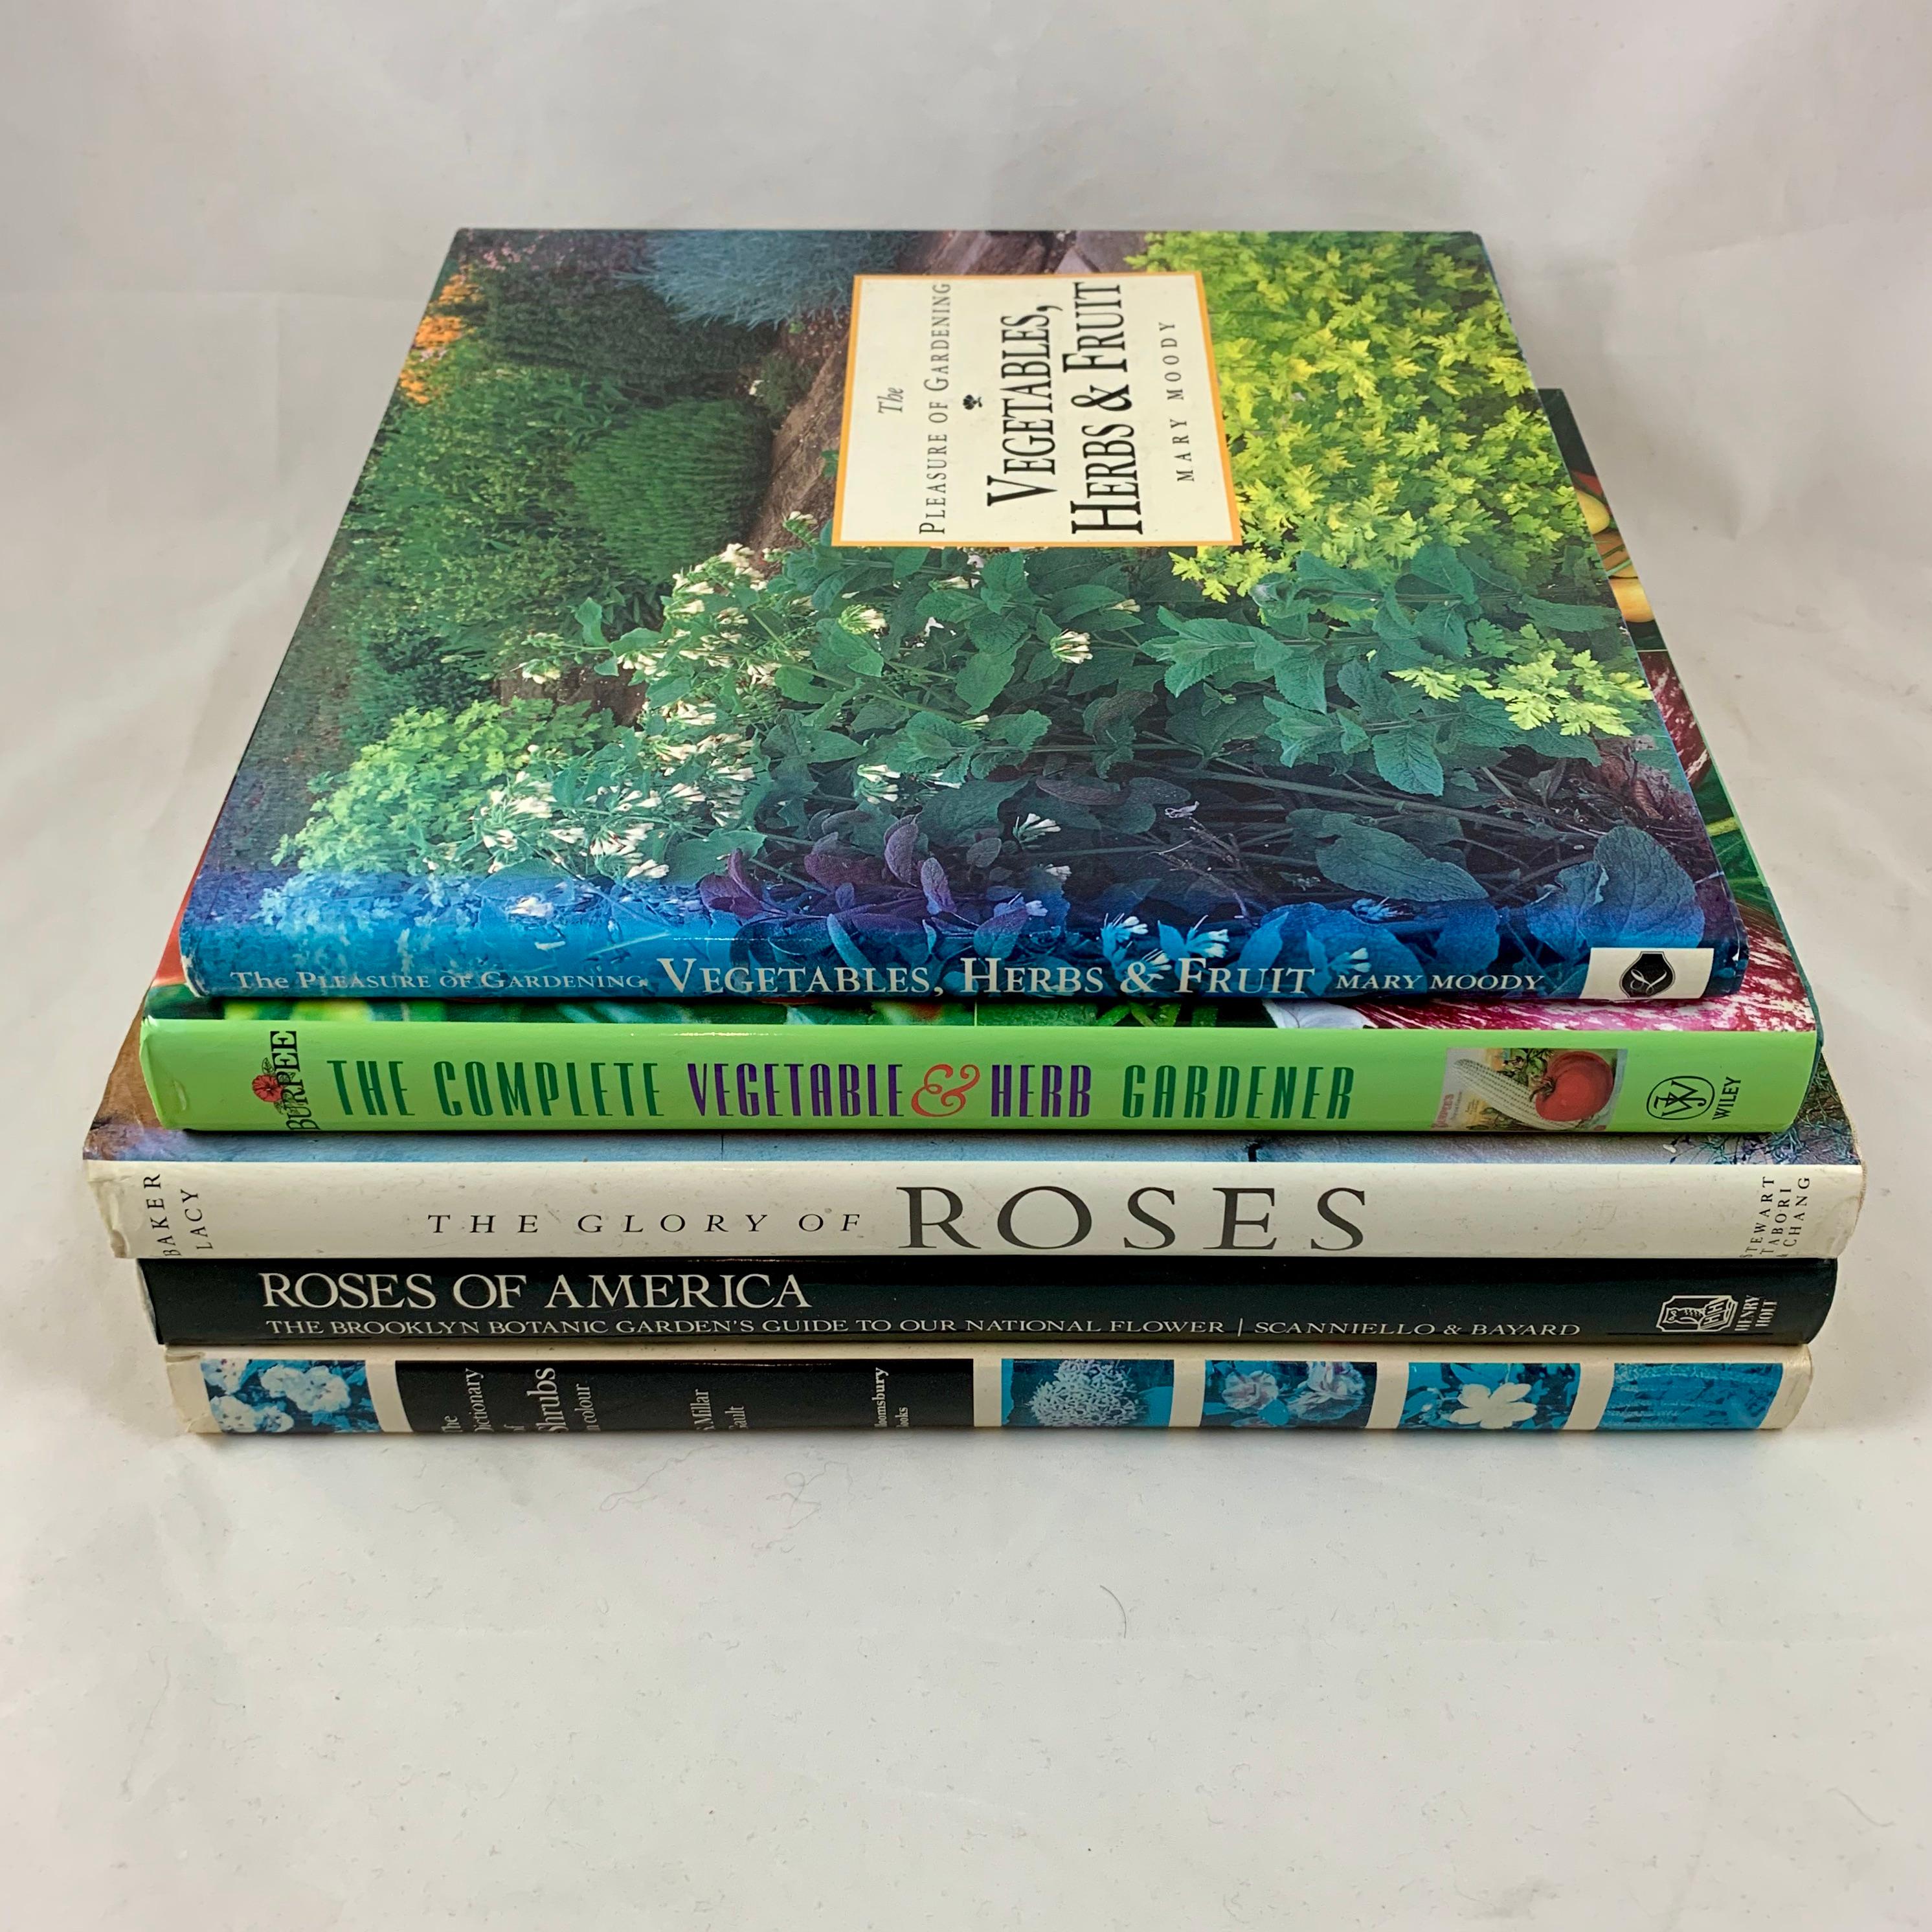 A collection of five hard-bound gardening books, suitable for the beginner and the advanced gardener alike. Covering a wide range of subjects from Roses, Herbs, Shrubs, Vegetables, and Fruit trees. All five books are full of color photos